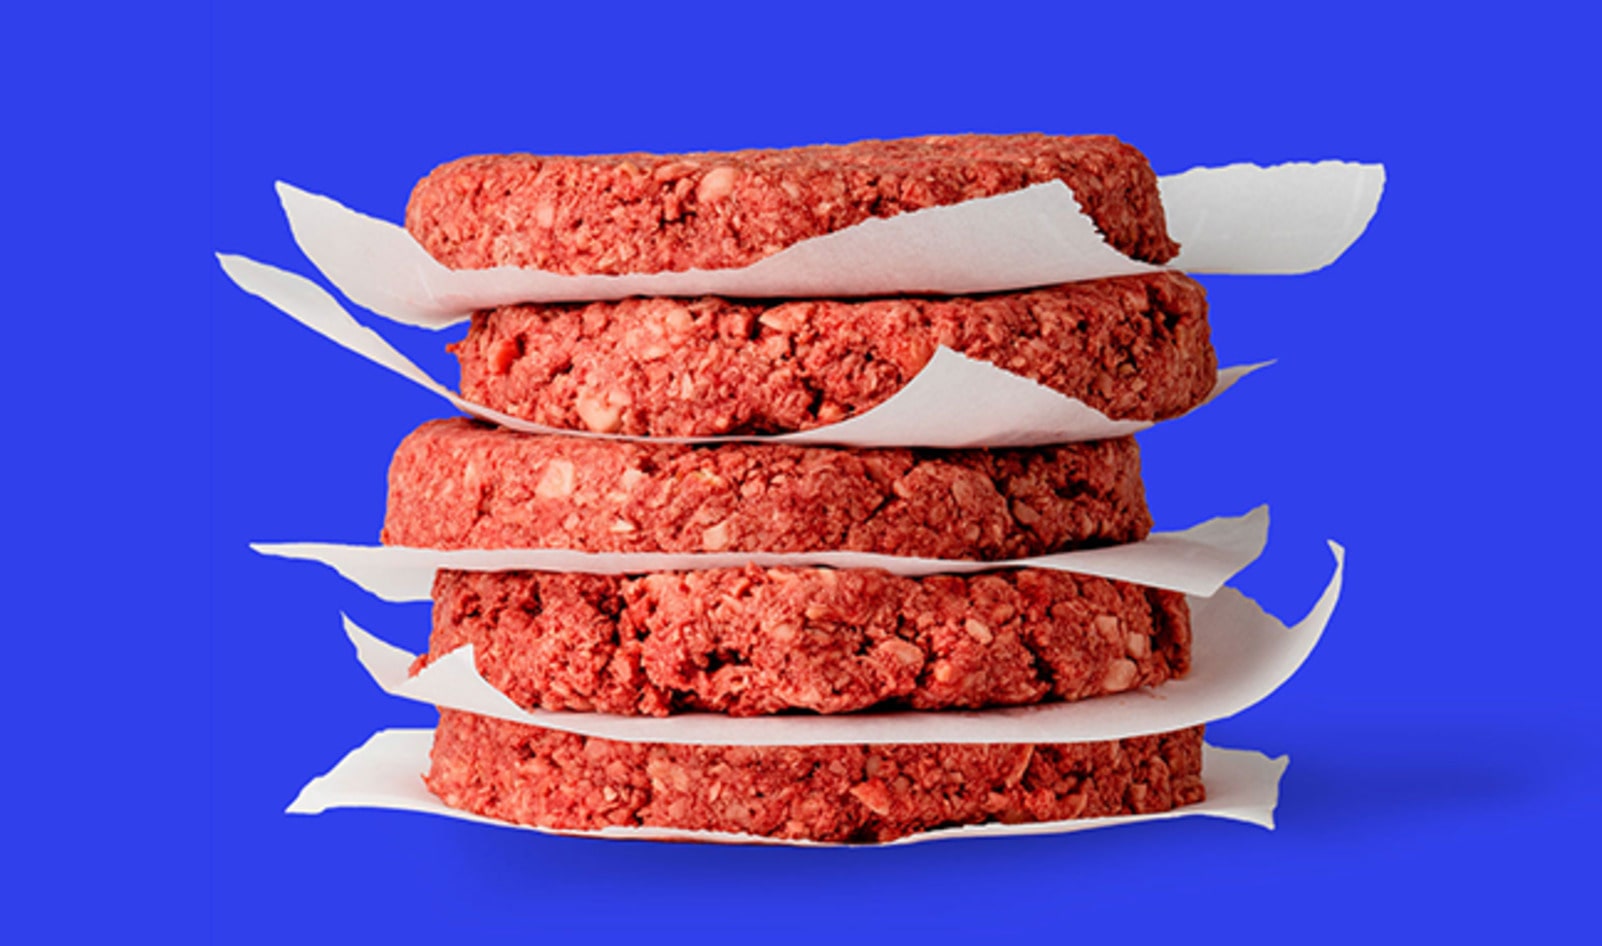 Plant-Based Impossible Burgers to Launch in Stores in 2019